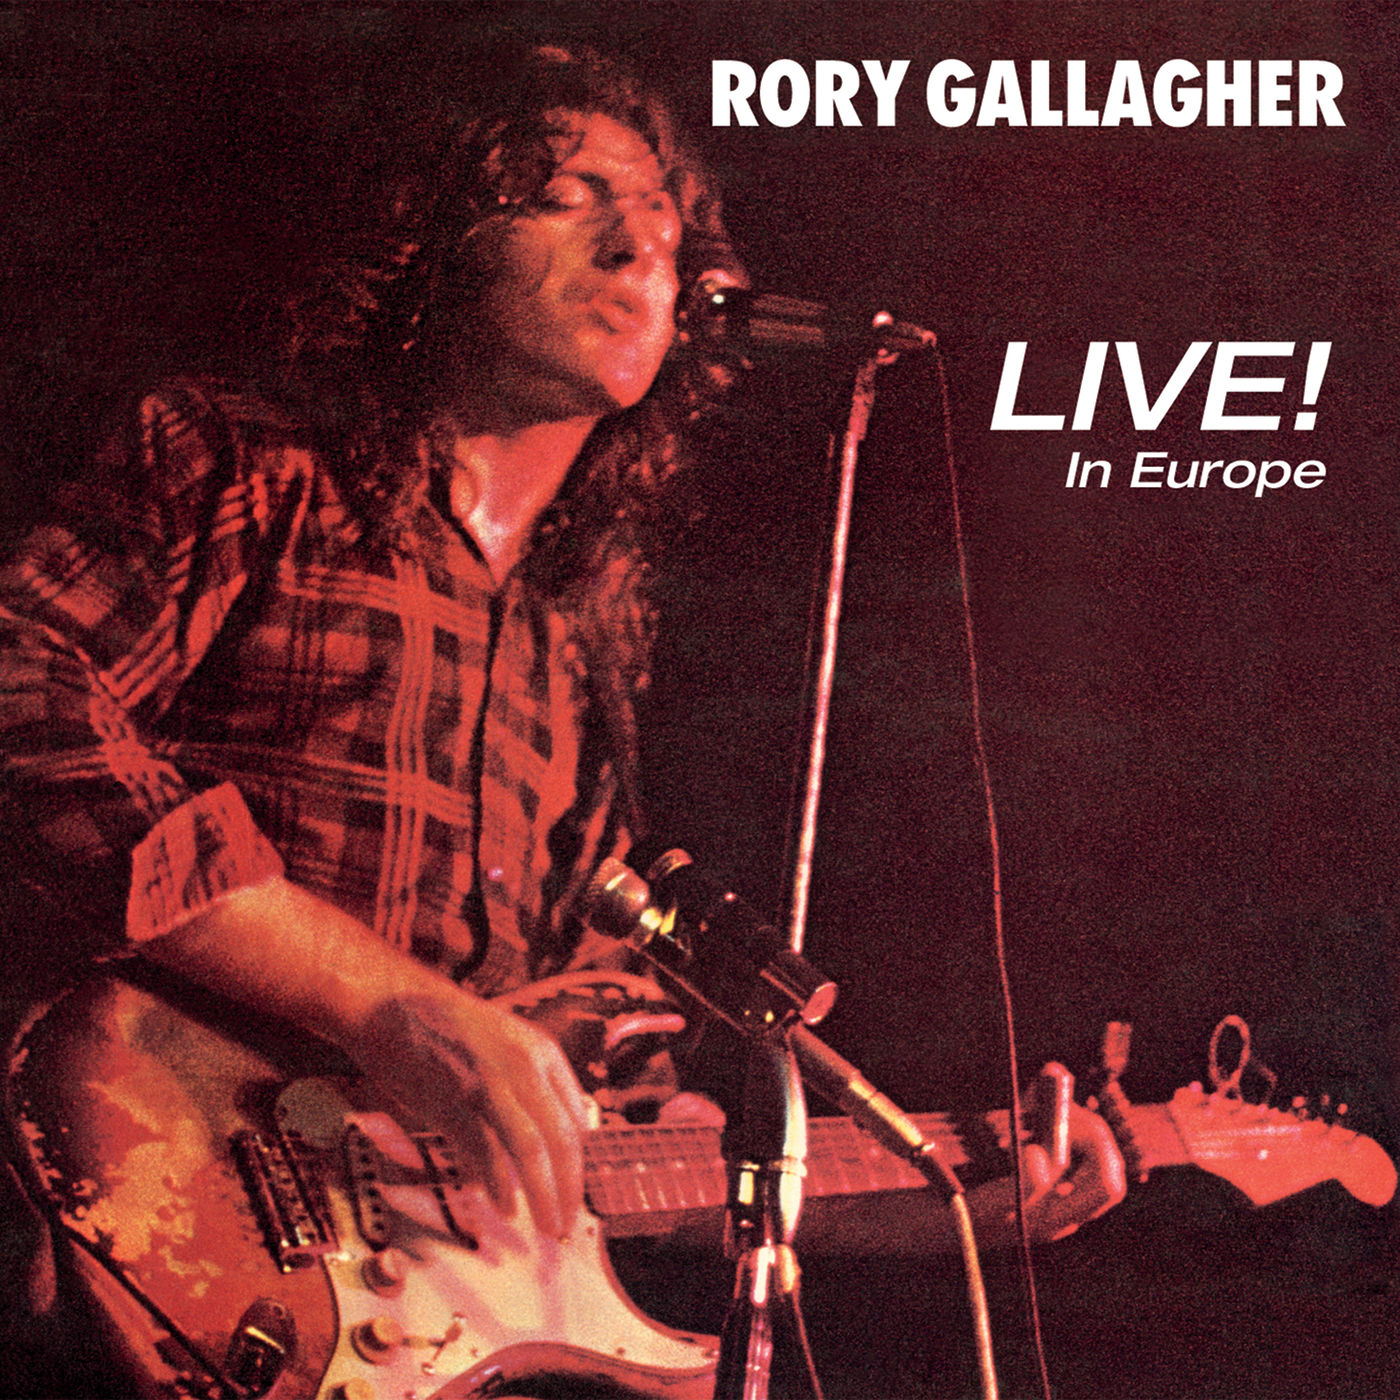 Rory Gallagher – Live! In Europe (Remastered) (1972/2020) [FLAC 24bit/96kHz]